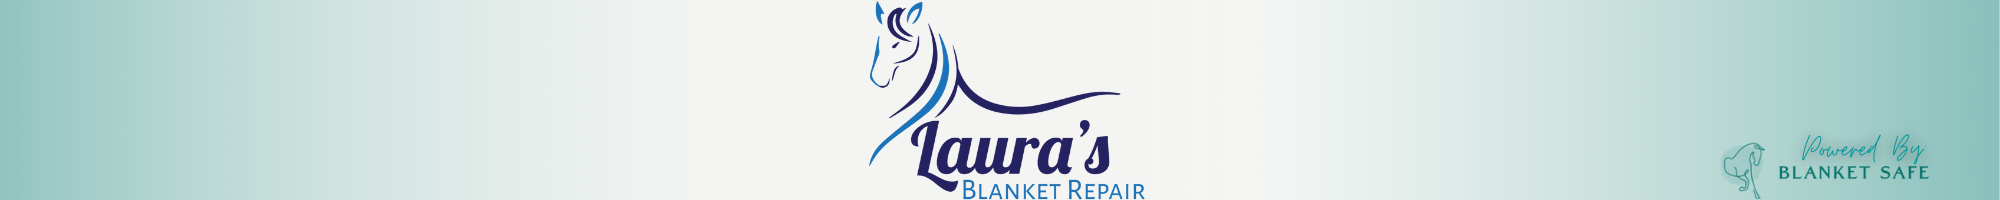 Laura's Blanket Repair – Keeping Your Horses Warm and Dry! Contact